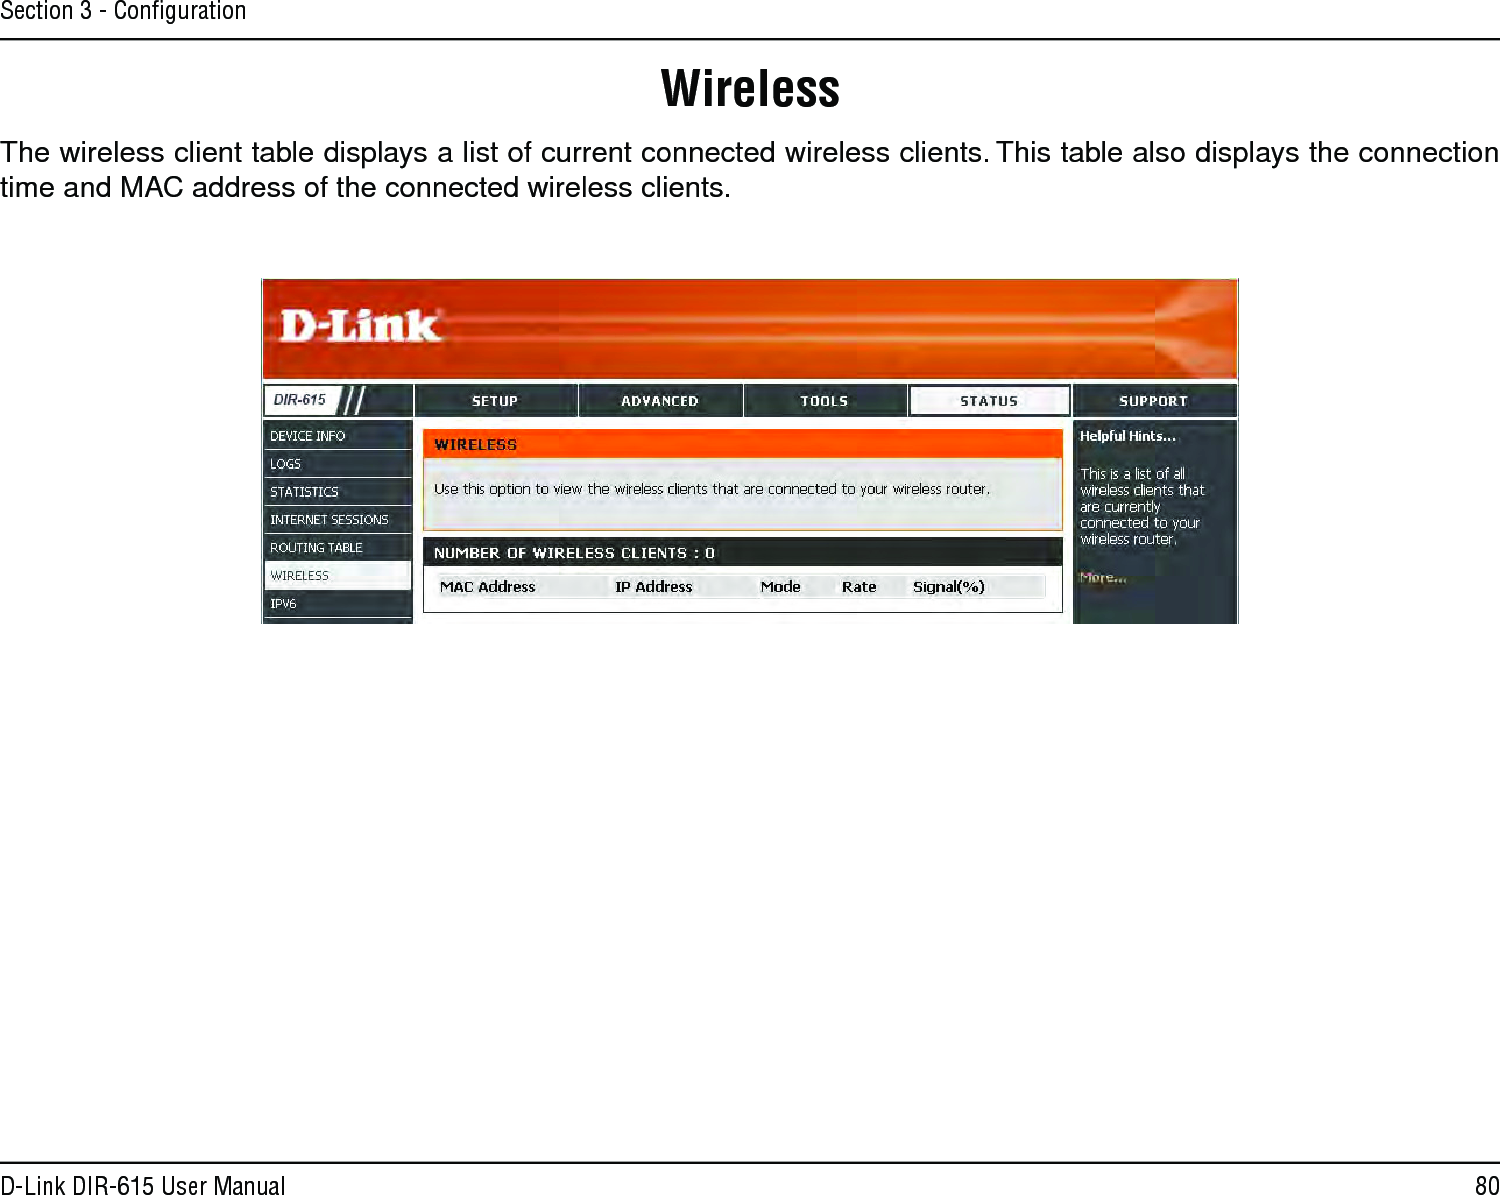 80D-Link DIR-615 User ManualSection 3 - ConﬁgurationThe wireless client table displays a list of current connected wireless clients. This table also displays the connection time and MAC address of the connected wireless clients.Wireless